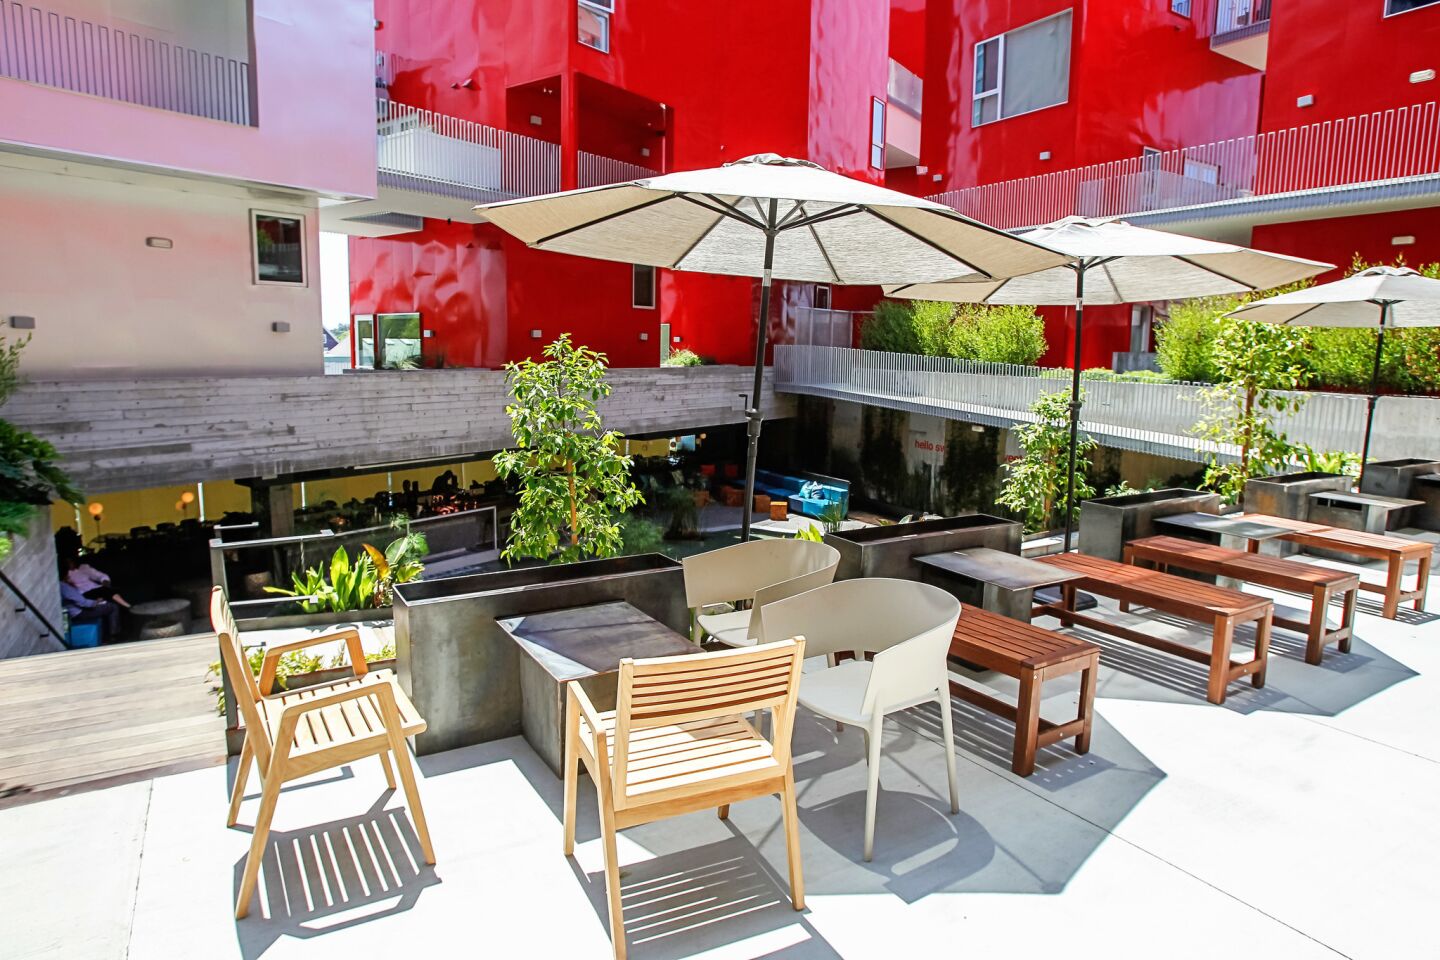 Since opening in April 2018, insideOUT has expanded its outdoor seating capacity to include more chairs and benches across a terraced area, something Ramon likes to call an "urban oasis."